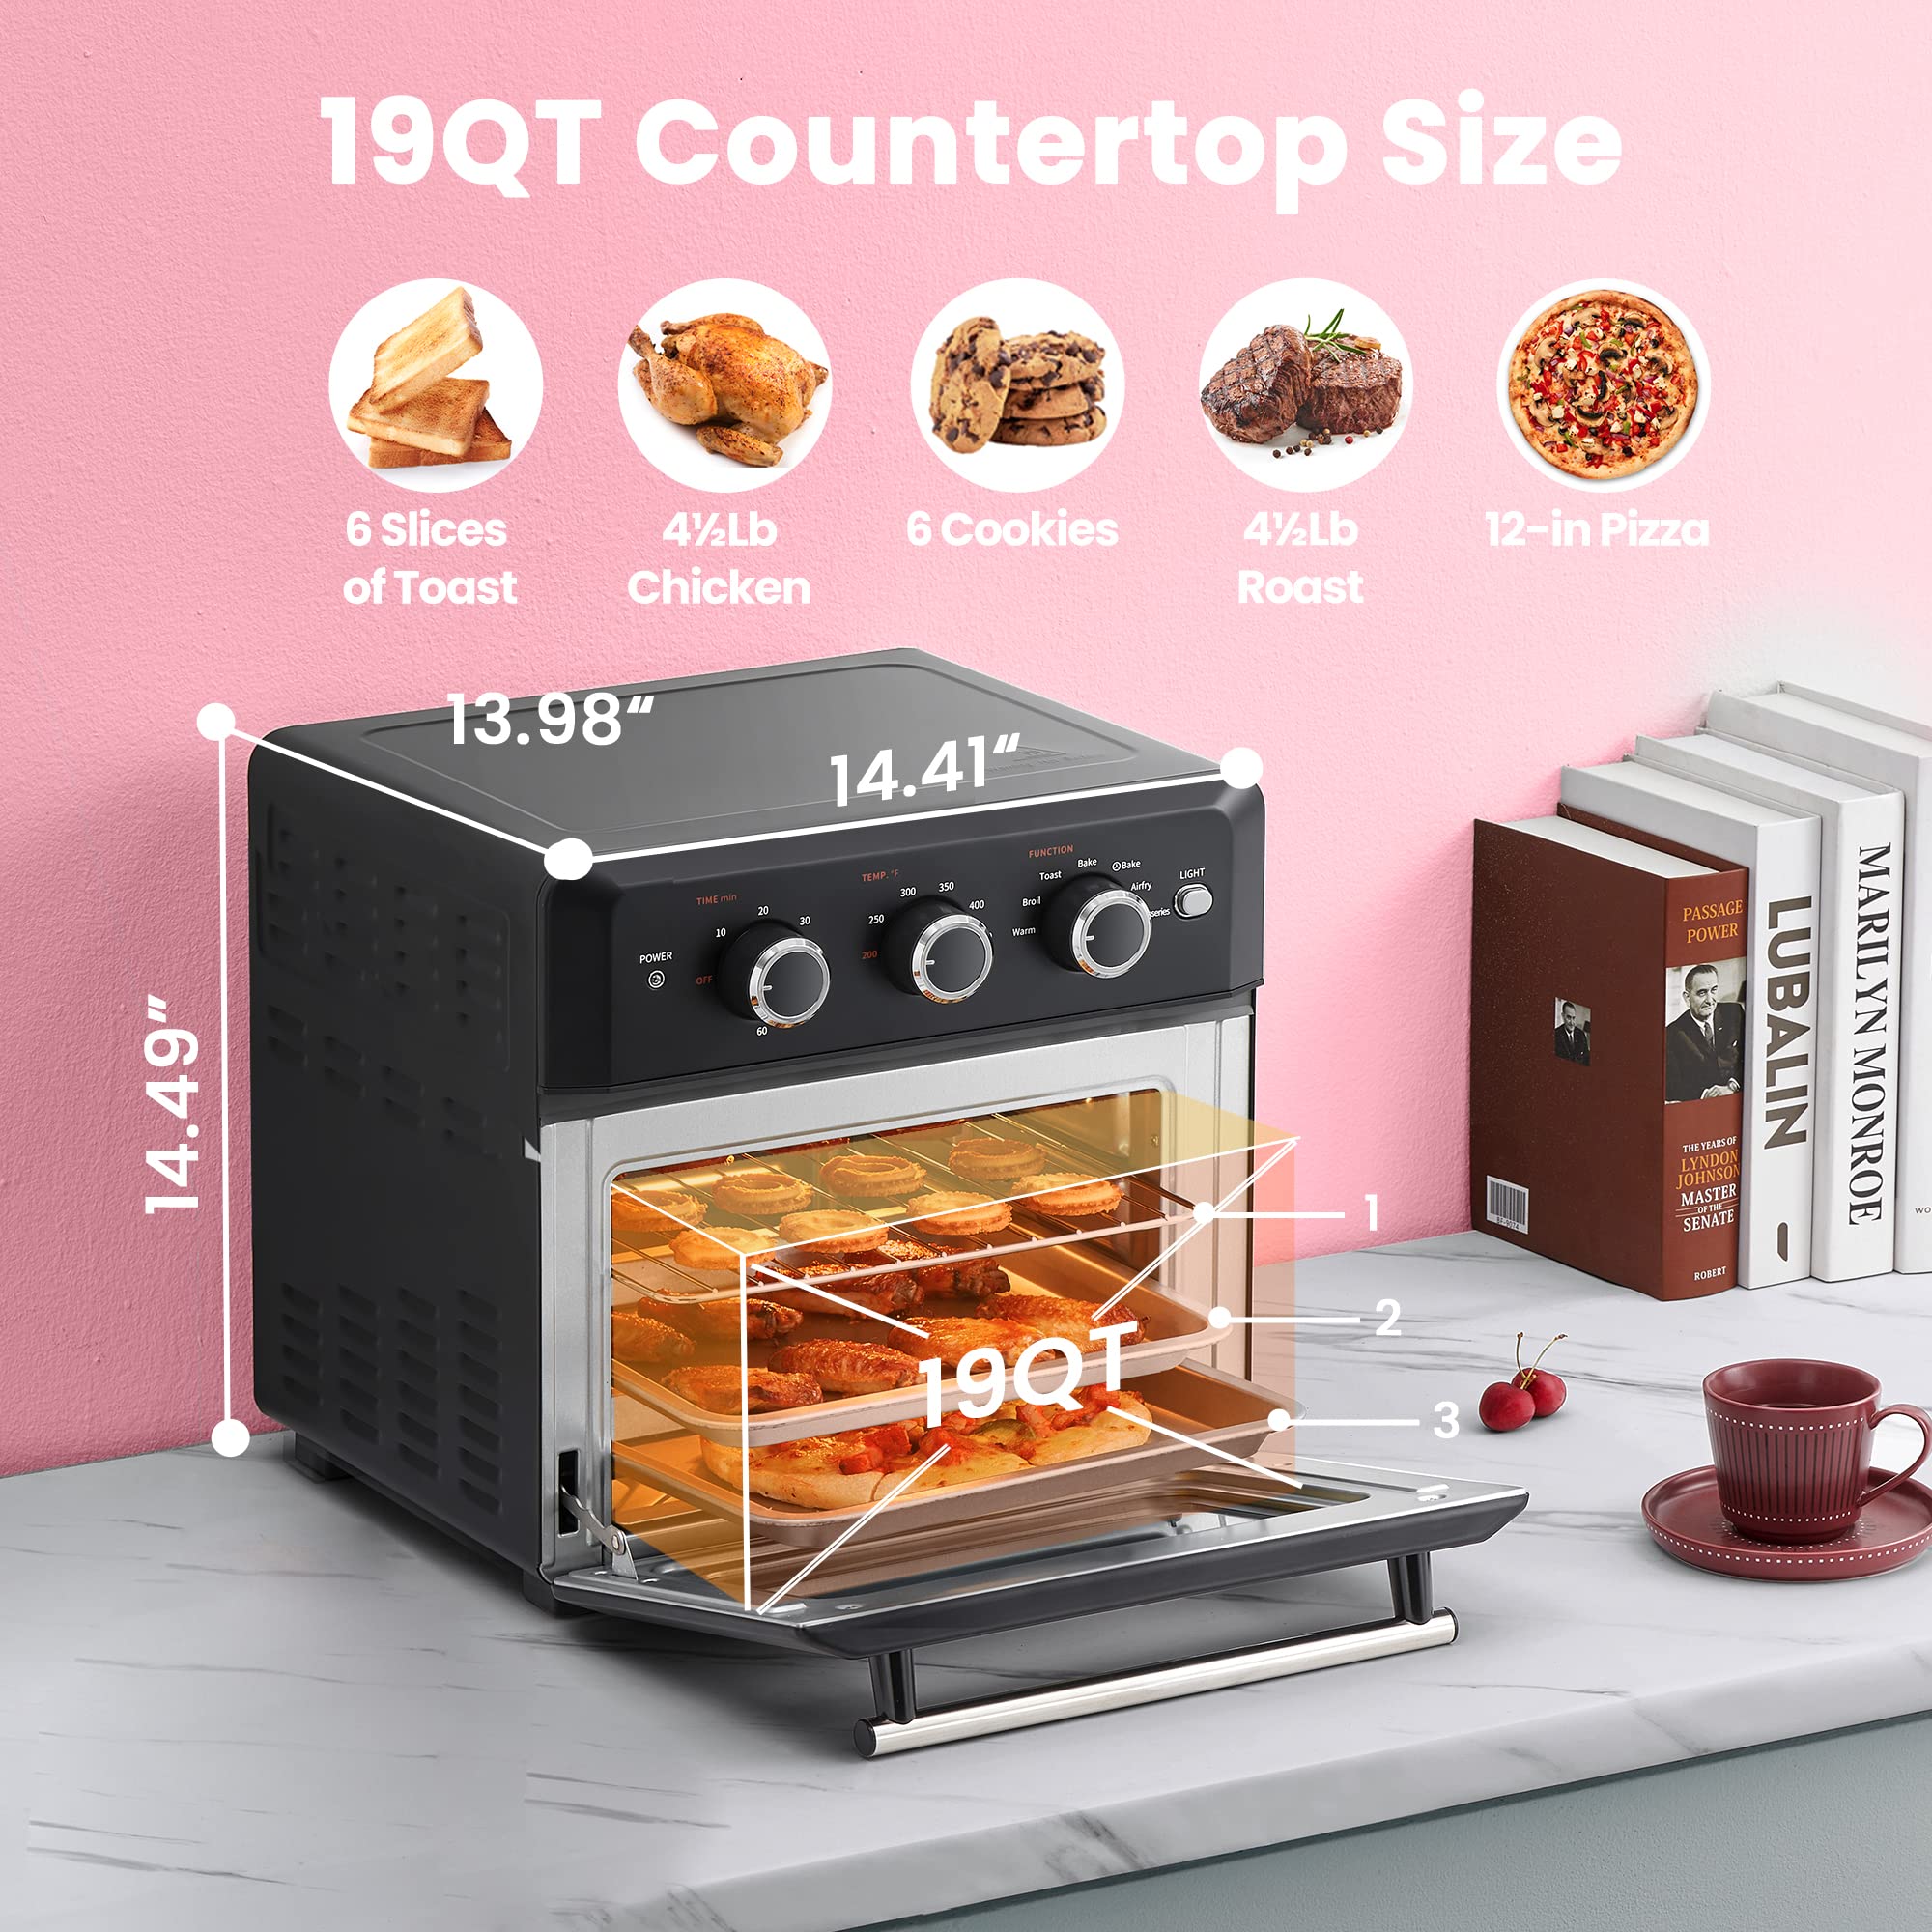 COMFEE' Retro Air Fry Toaster Oven, 7-in-1, 1500W, 19QT Capacity, 6 Slice, Rotisseries, Warm, Broil, Toast, Convection Bake, Black, Perfect for Countertop